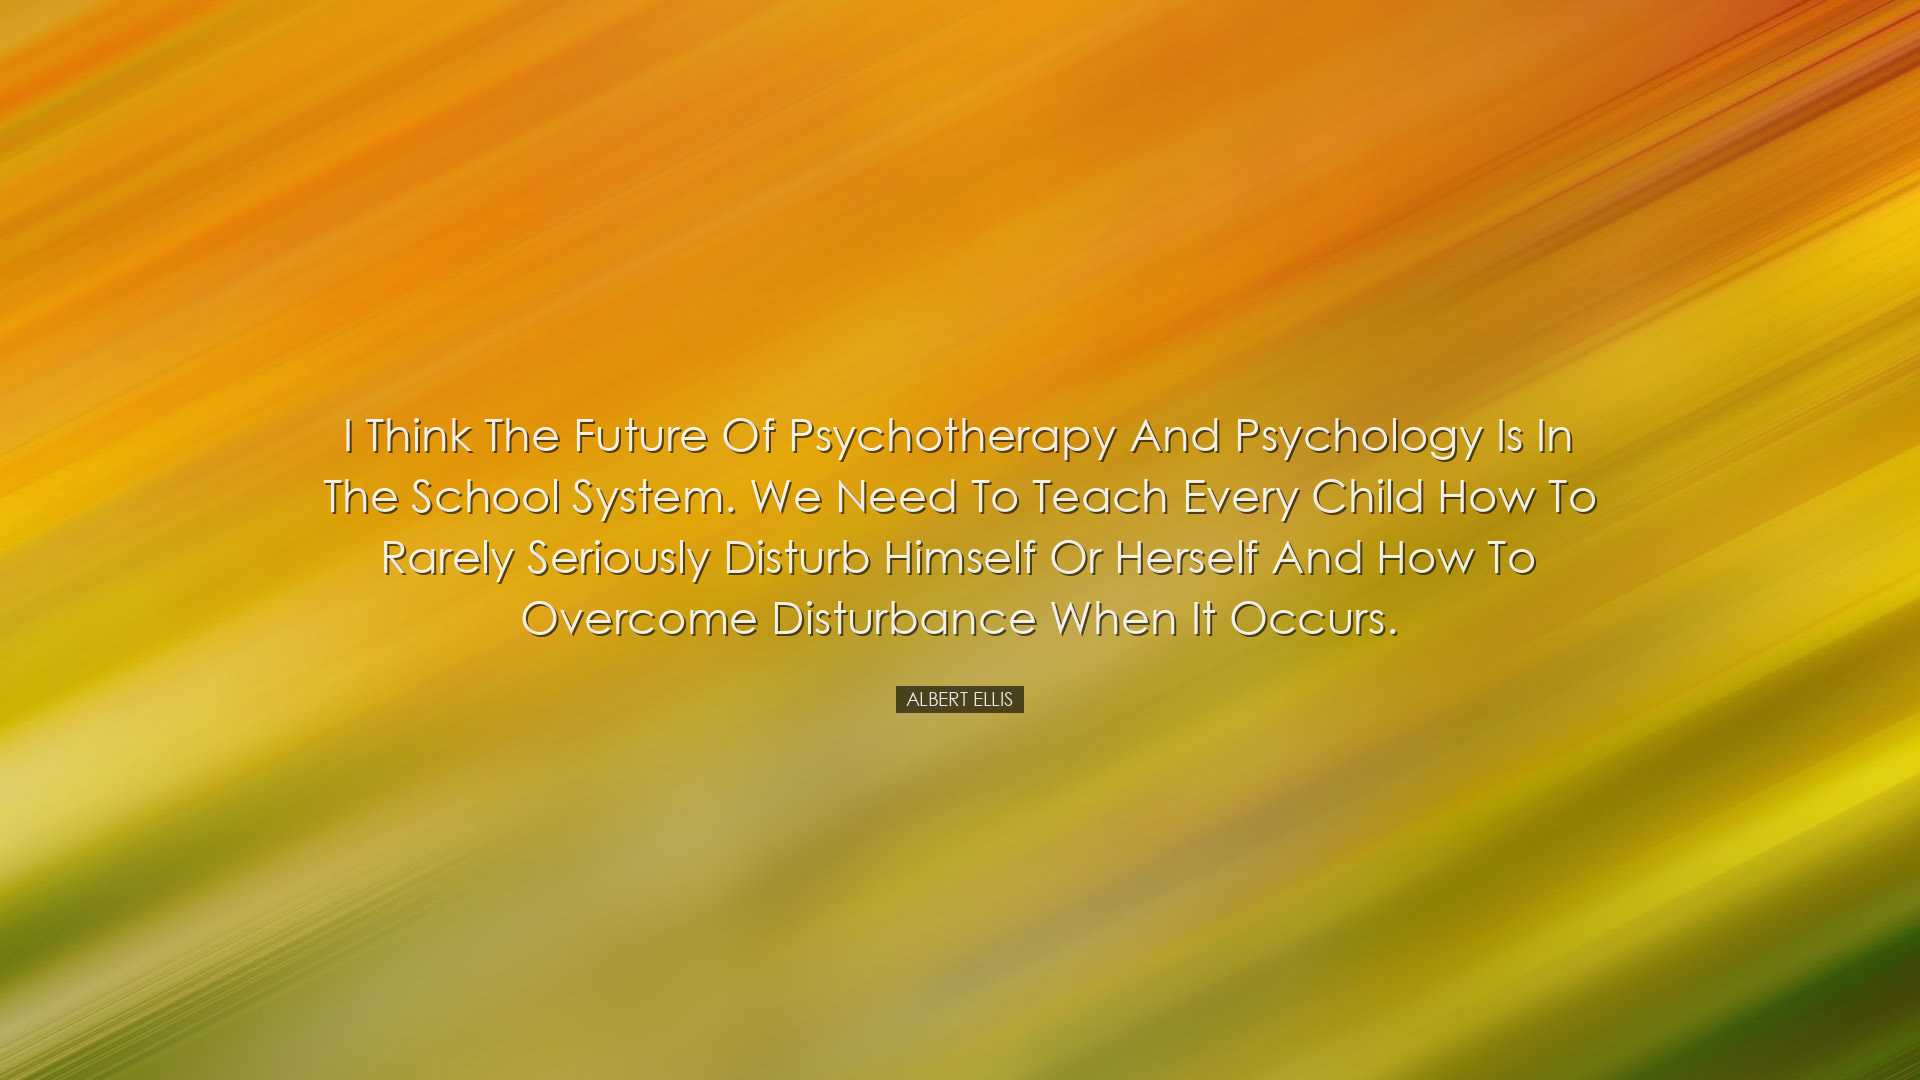 I think the future of psychotherapy and psychology is in the schoo